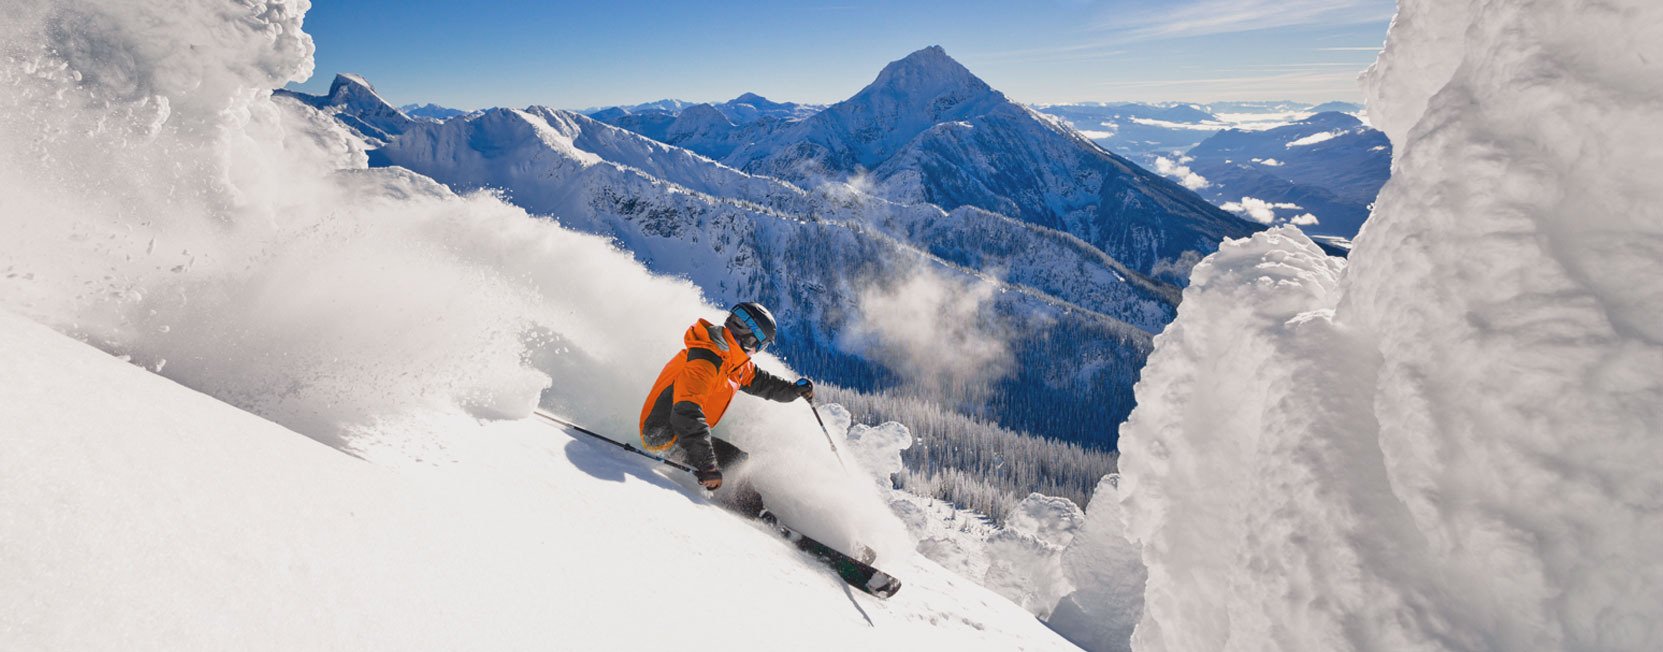 Ski Vacation Package - Up to 2 nights FREE at the Sutton Place Revelstoke!